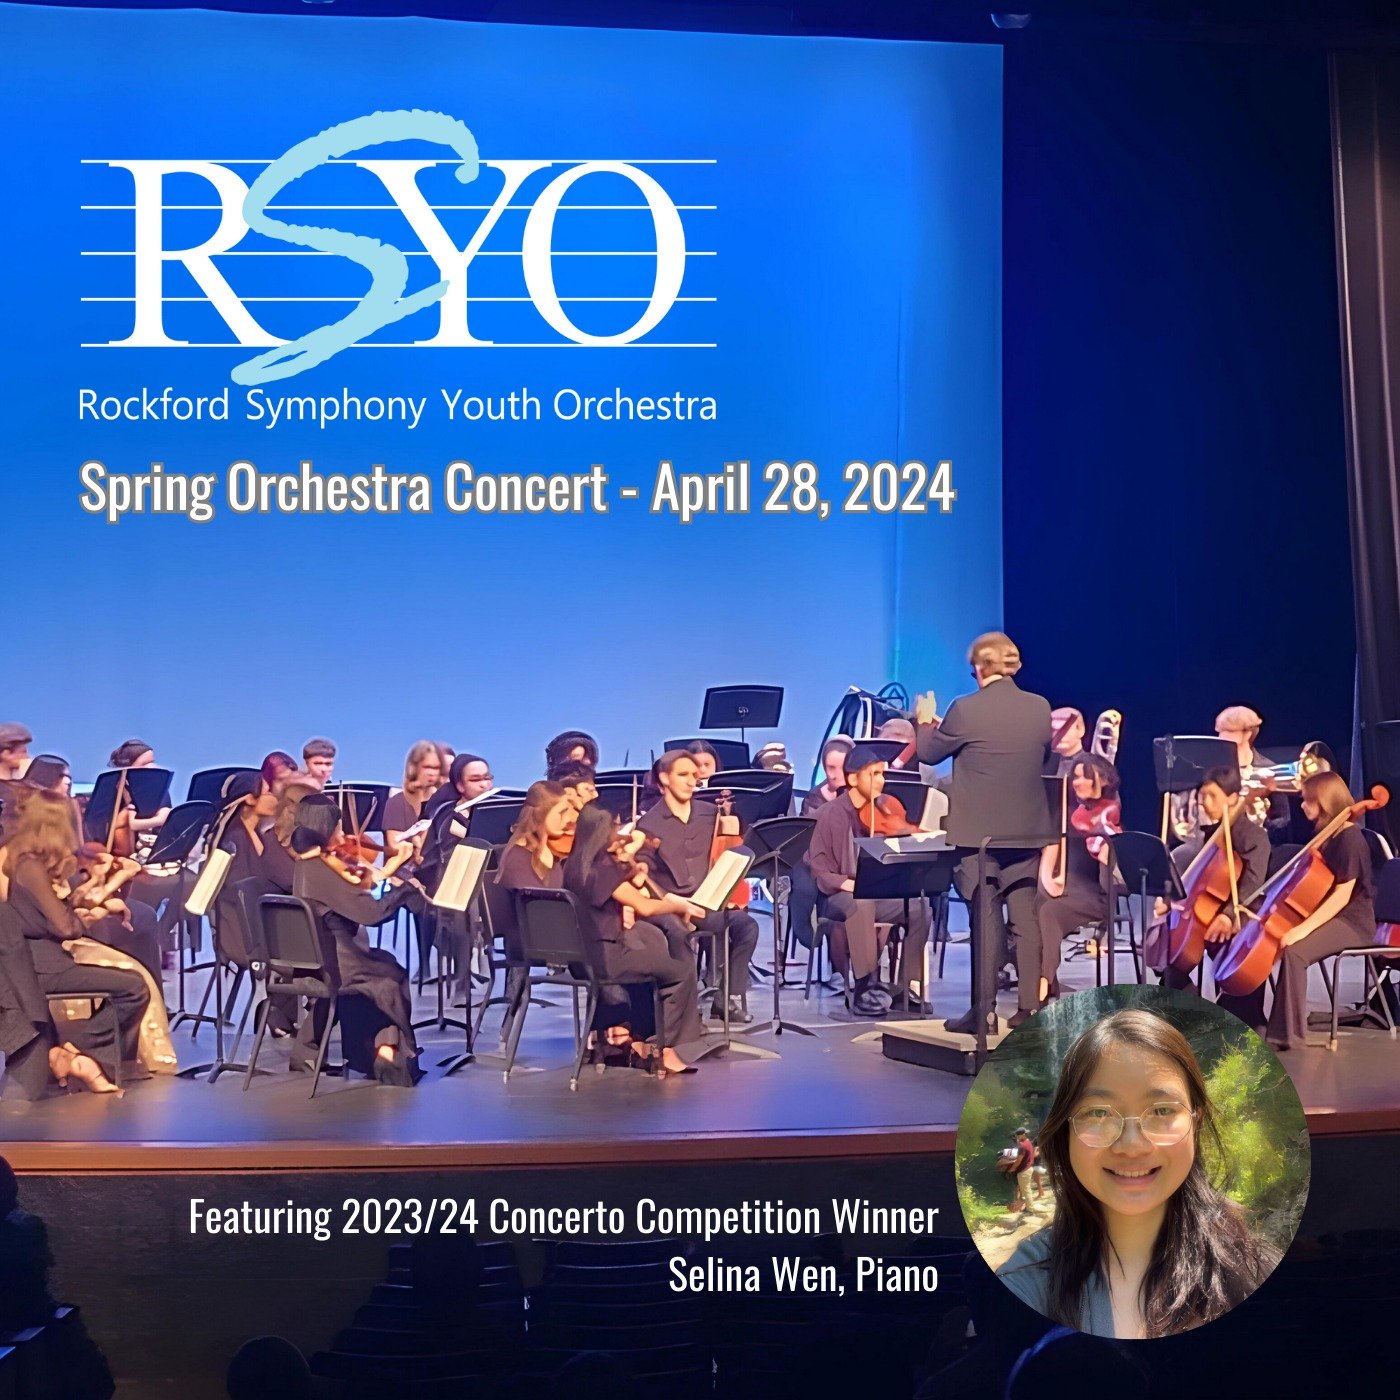 Join us this Sunday for our Spring Orchestra Concert at Belvidere High School! The concert will begin at 3pm and feature music from Bizet, Tchaikovsky, Holst, and Saint-Sa&euml;ns' Piano Concerto No. 2 alongside Concerto Competition Winner Selina Wen